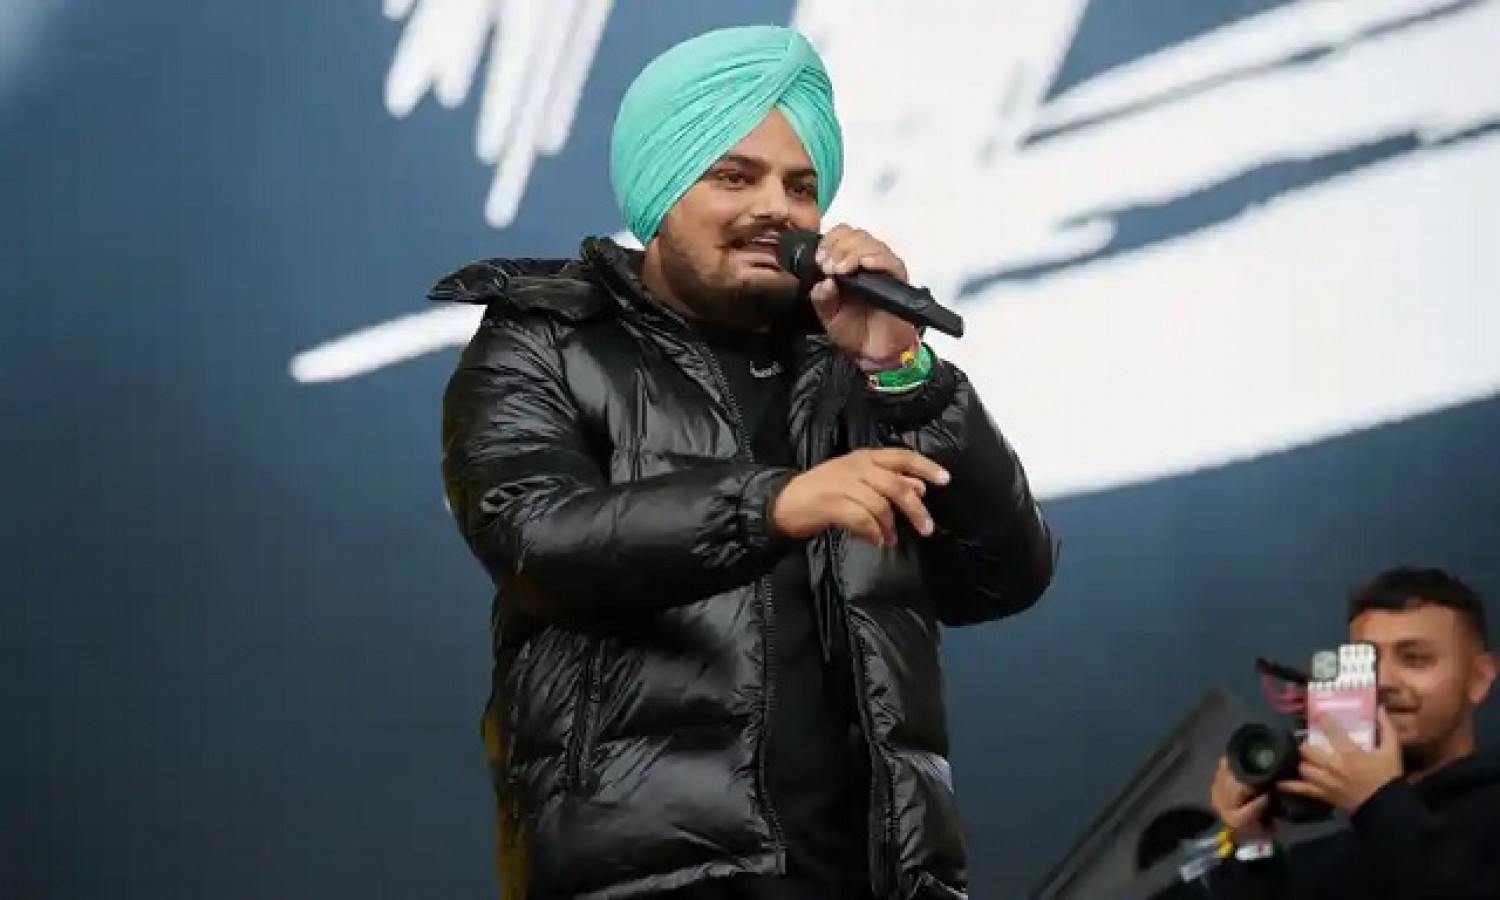 Sidhu Moose Walas parents get tattooed to give tribute